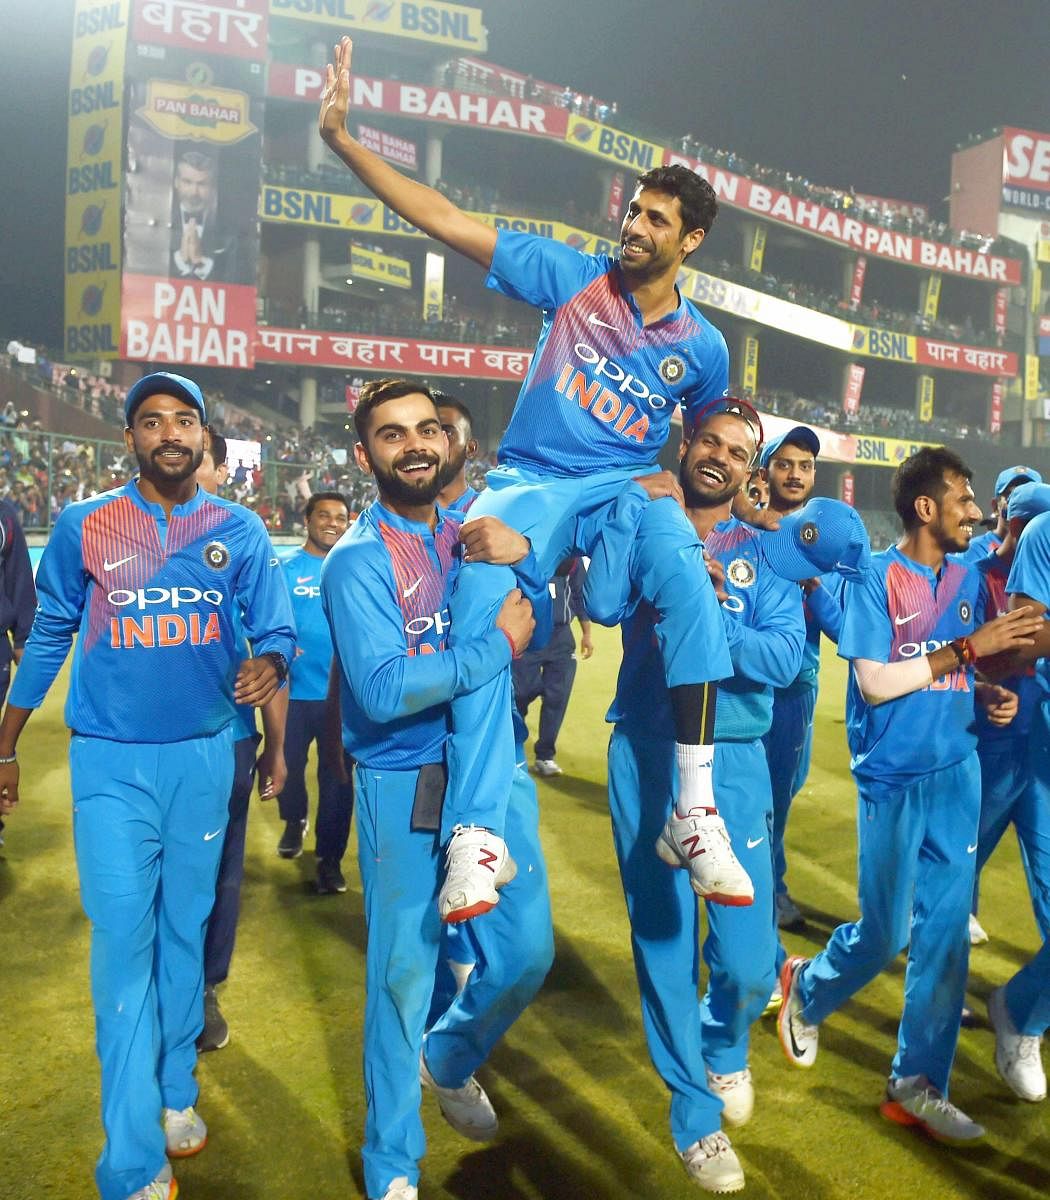 India's Ashish Nehra waves to the crowd after his retirement from all forms of cricket during the first T20 match against New Zealand at Feroz Shah Kotla Stadium in New Delhi, on Wednesday. PTI Photo